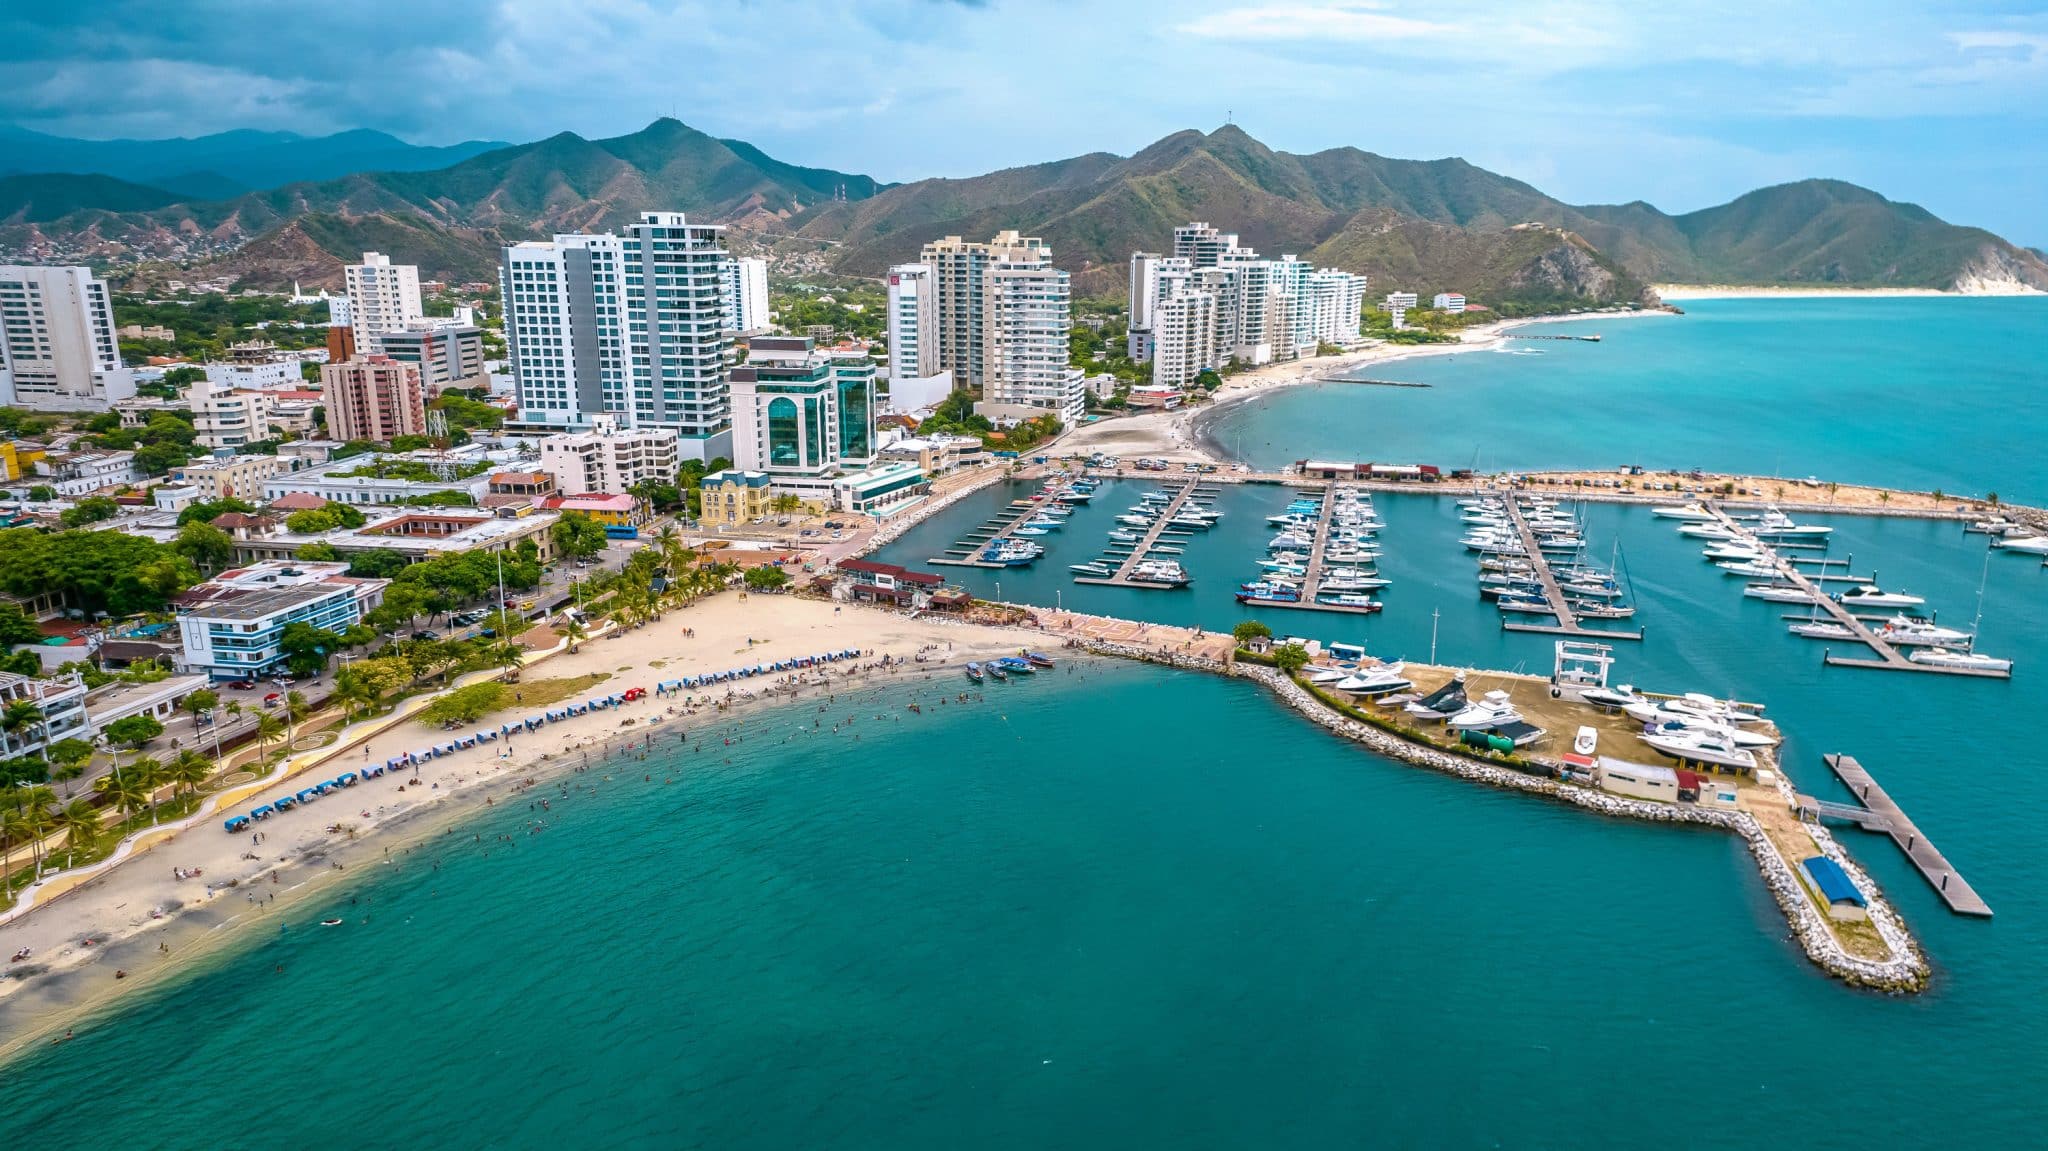 Aerial view of downtown Santa Marta, Colombia